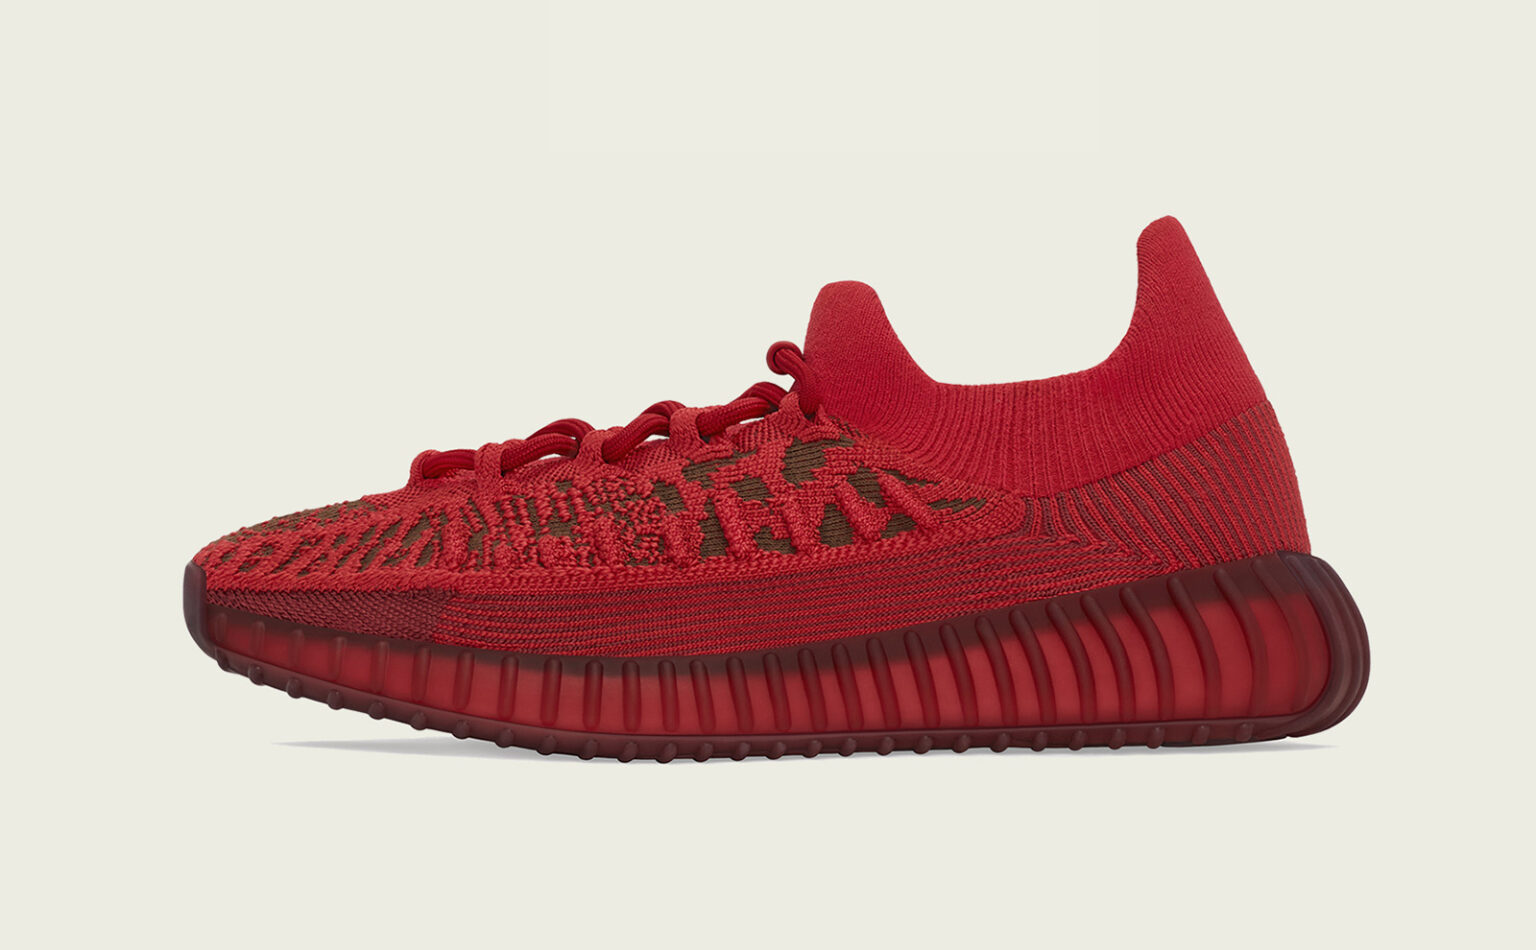 adidas YZY 350 V2 CMPCT “SLATE RED” “Ye / KANYE WEST” | 特集ページ Features ...